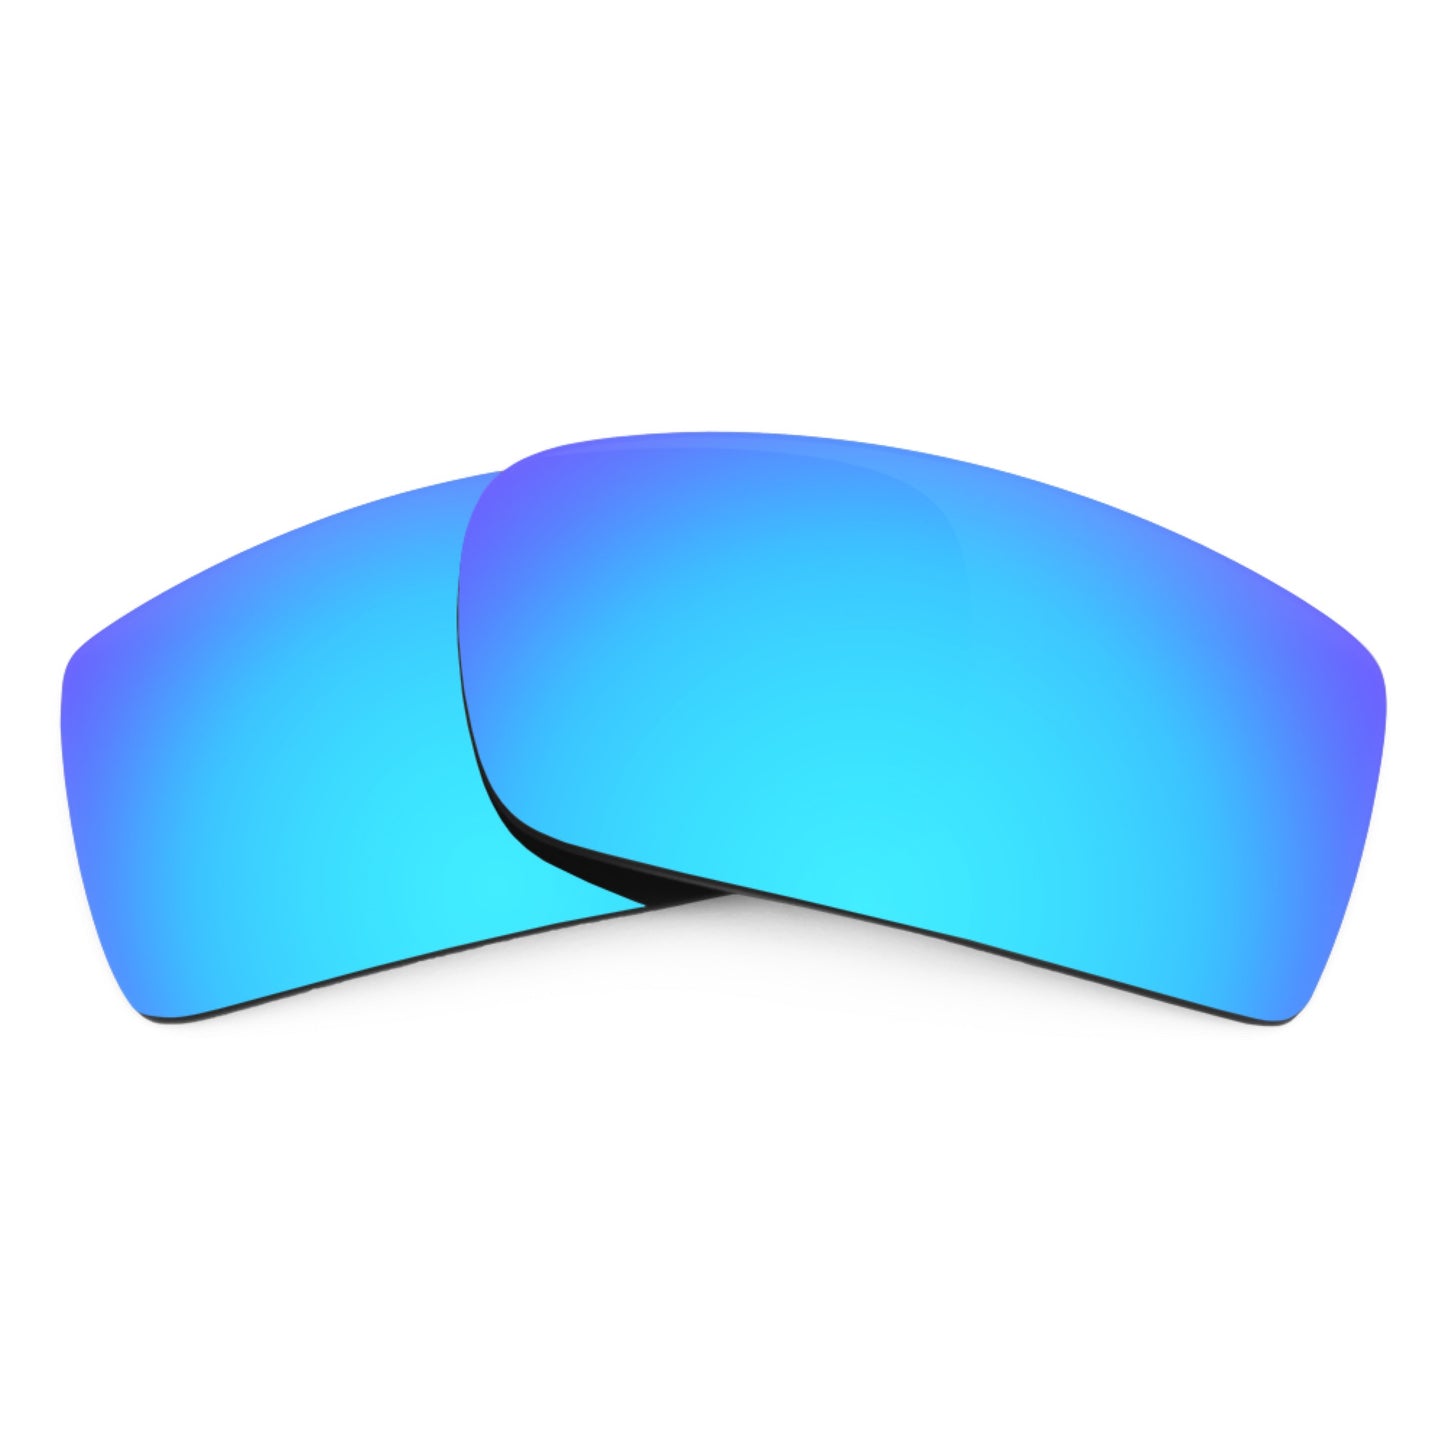 Revant replacement lenses for Ray-Ban Rituals RB4018 49mm Non-Polarized Ice Blue